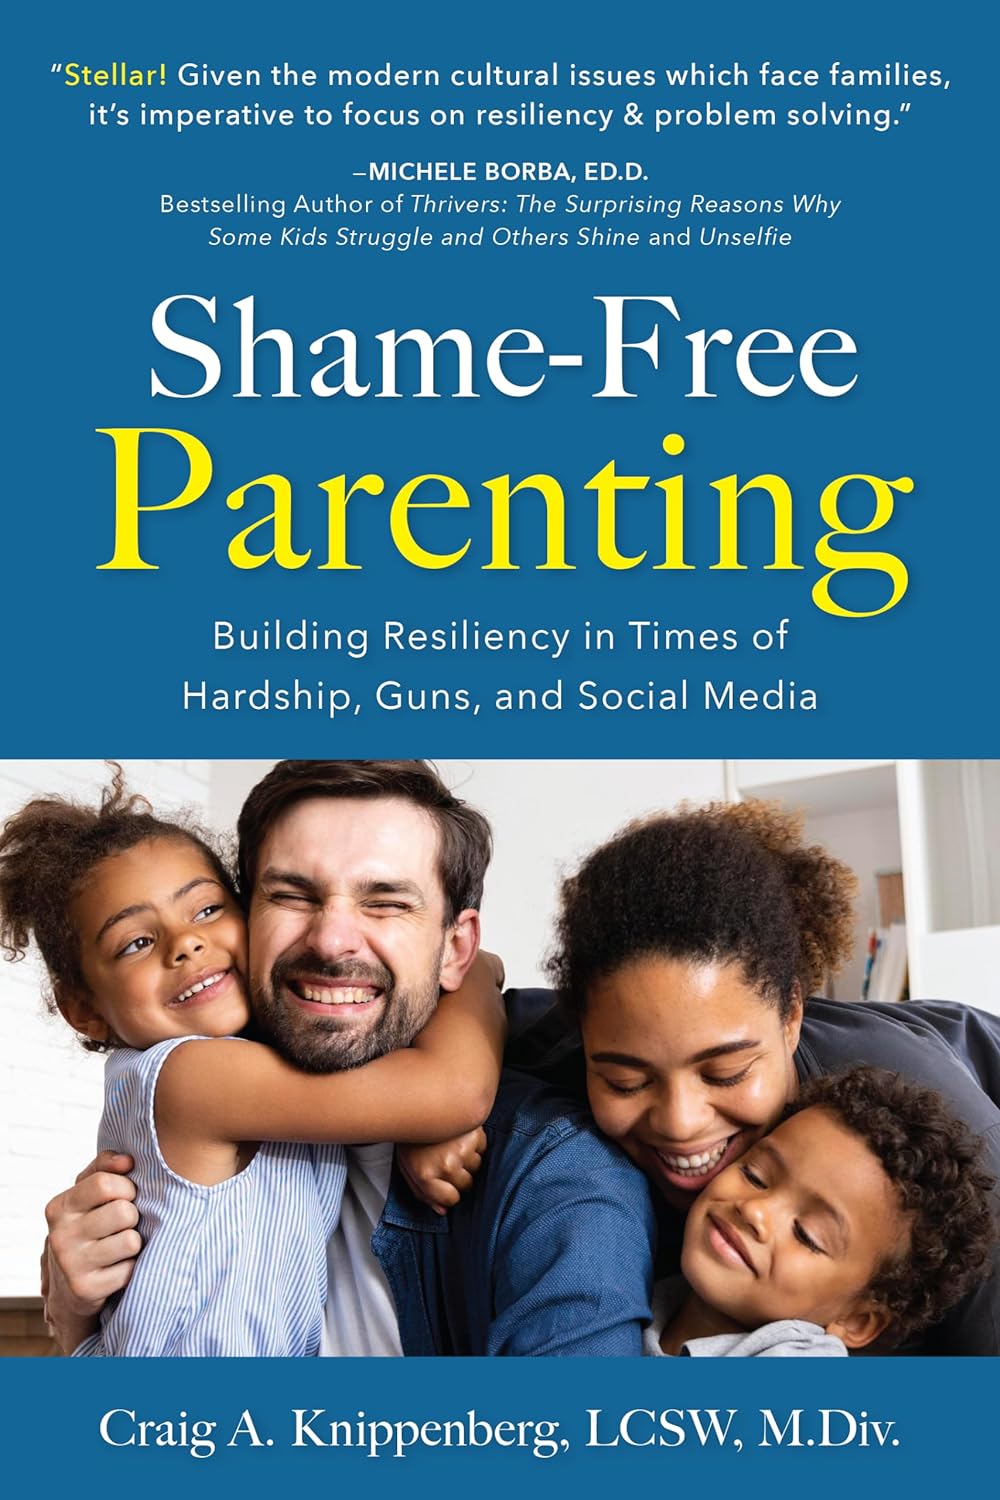 Shame-Free Parenting, Craig A. Knippenberg, LCSW, M.Div., Book Cover